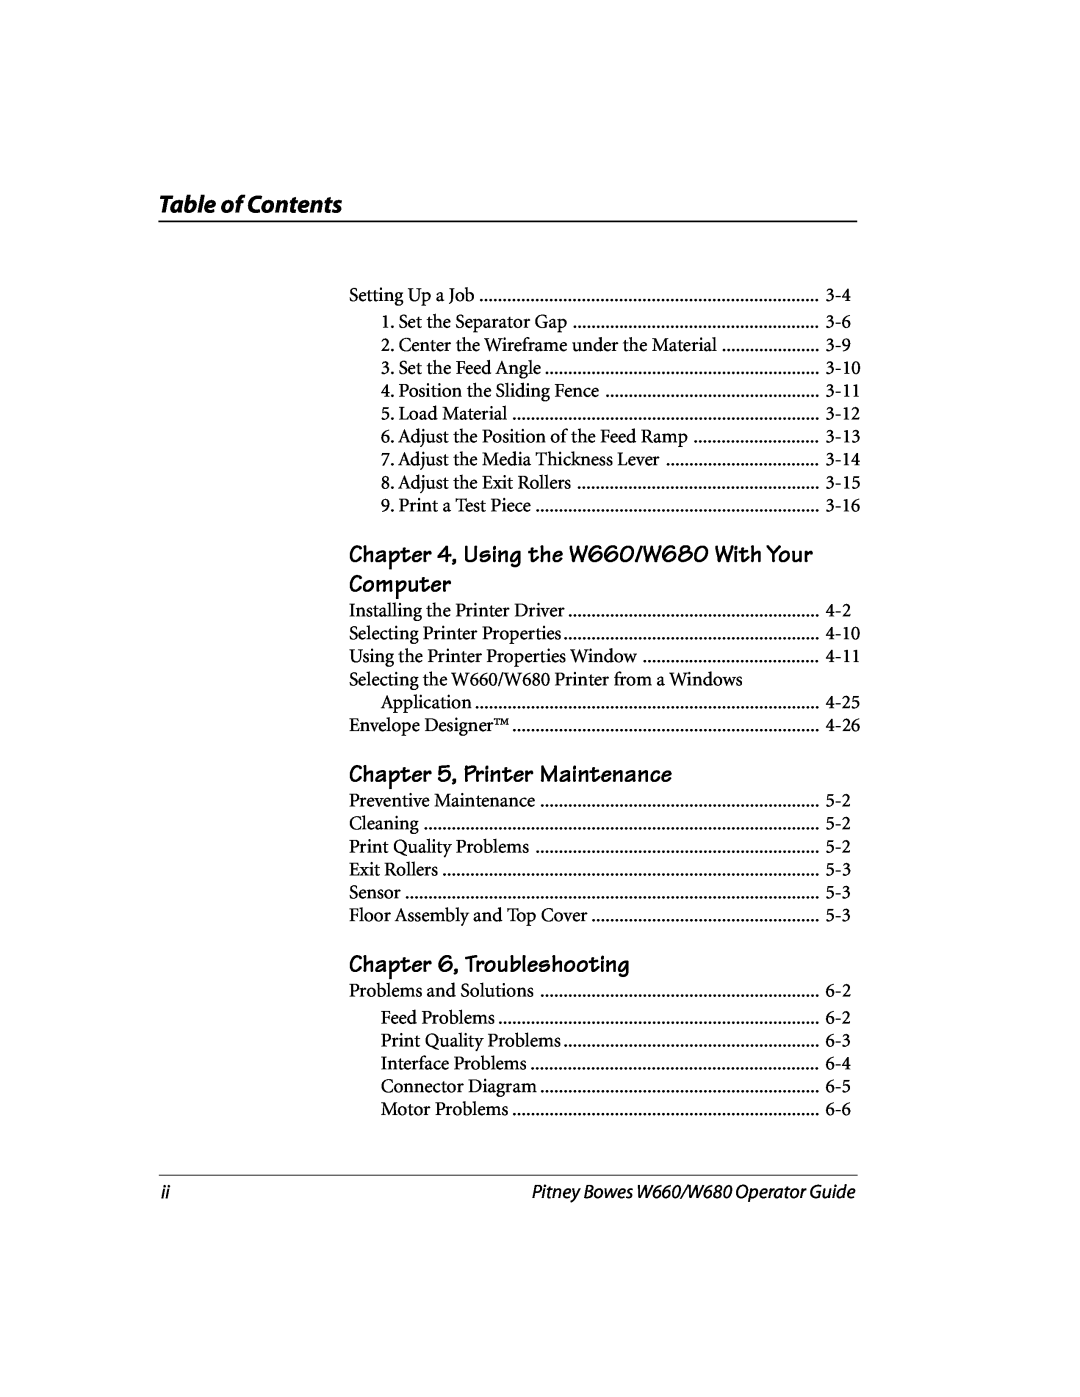 Pitney Bowes manual Using the W660/W680 With Your Computer, Printer Maintenance, Troubleshooting, Table of Contents 